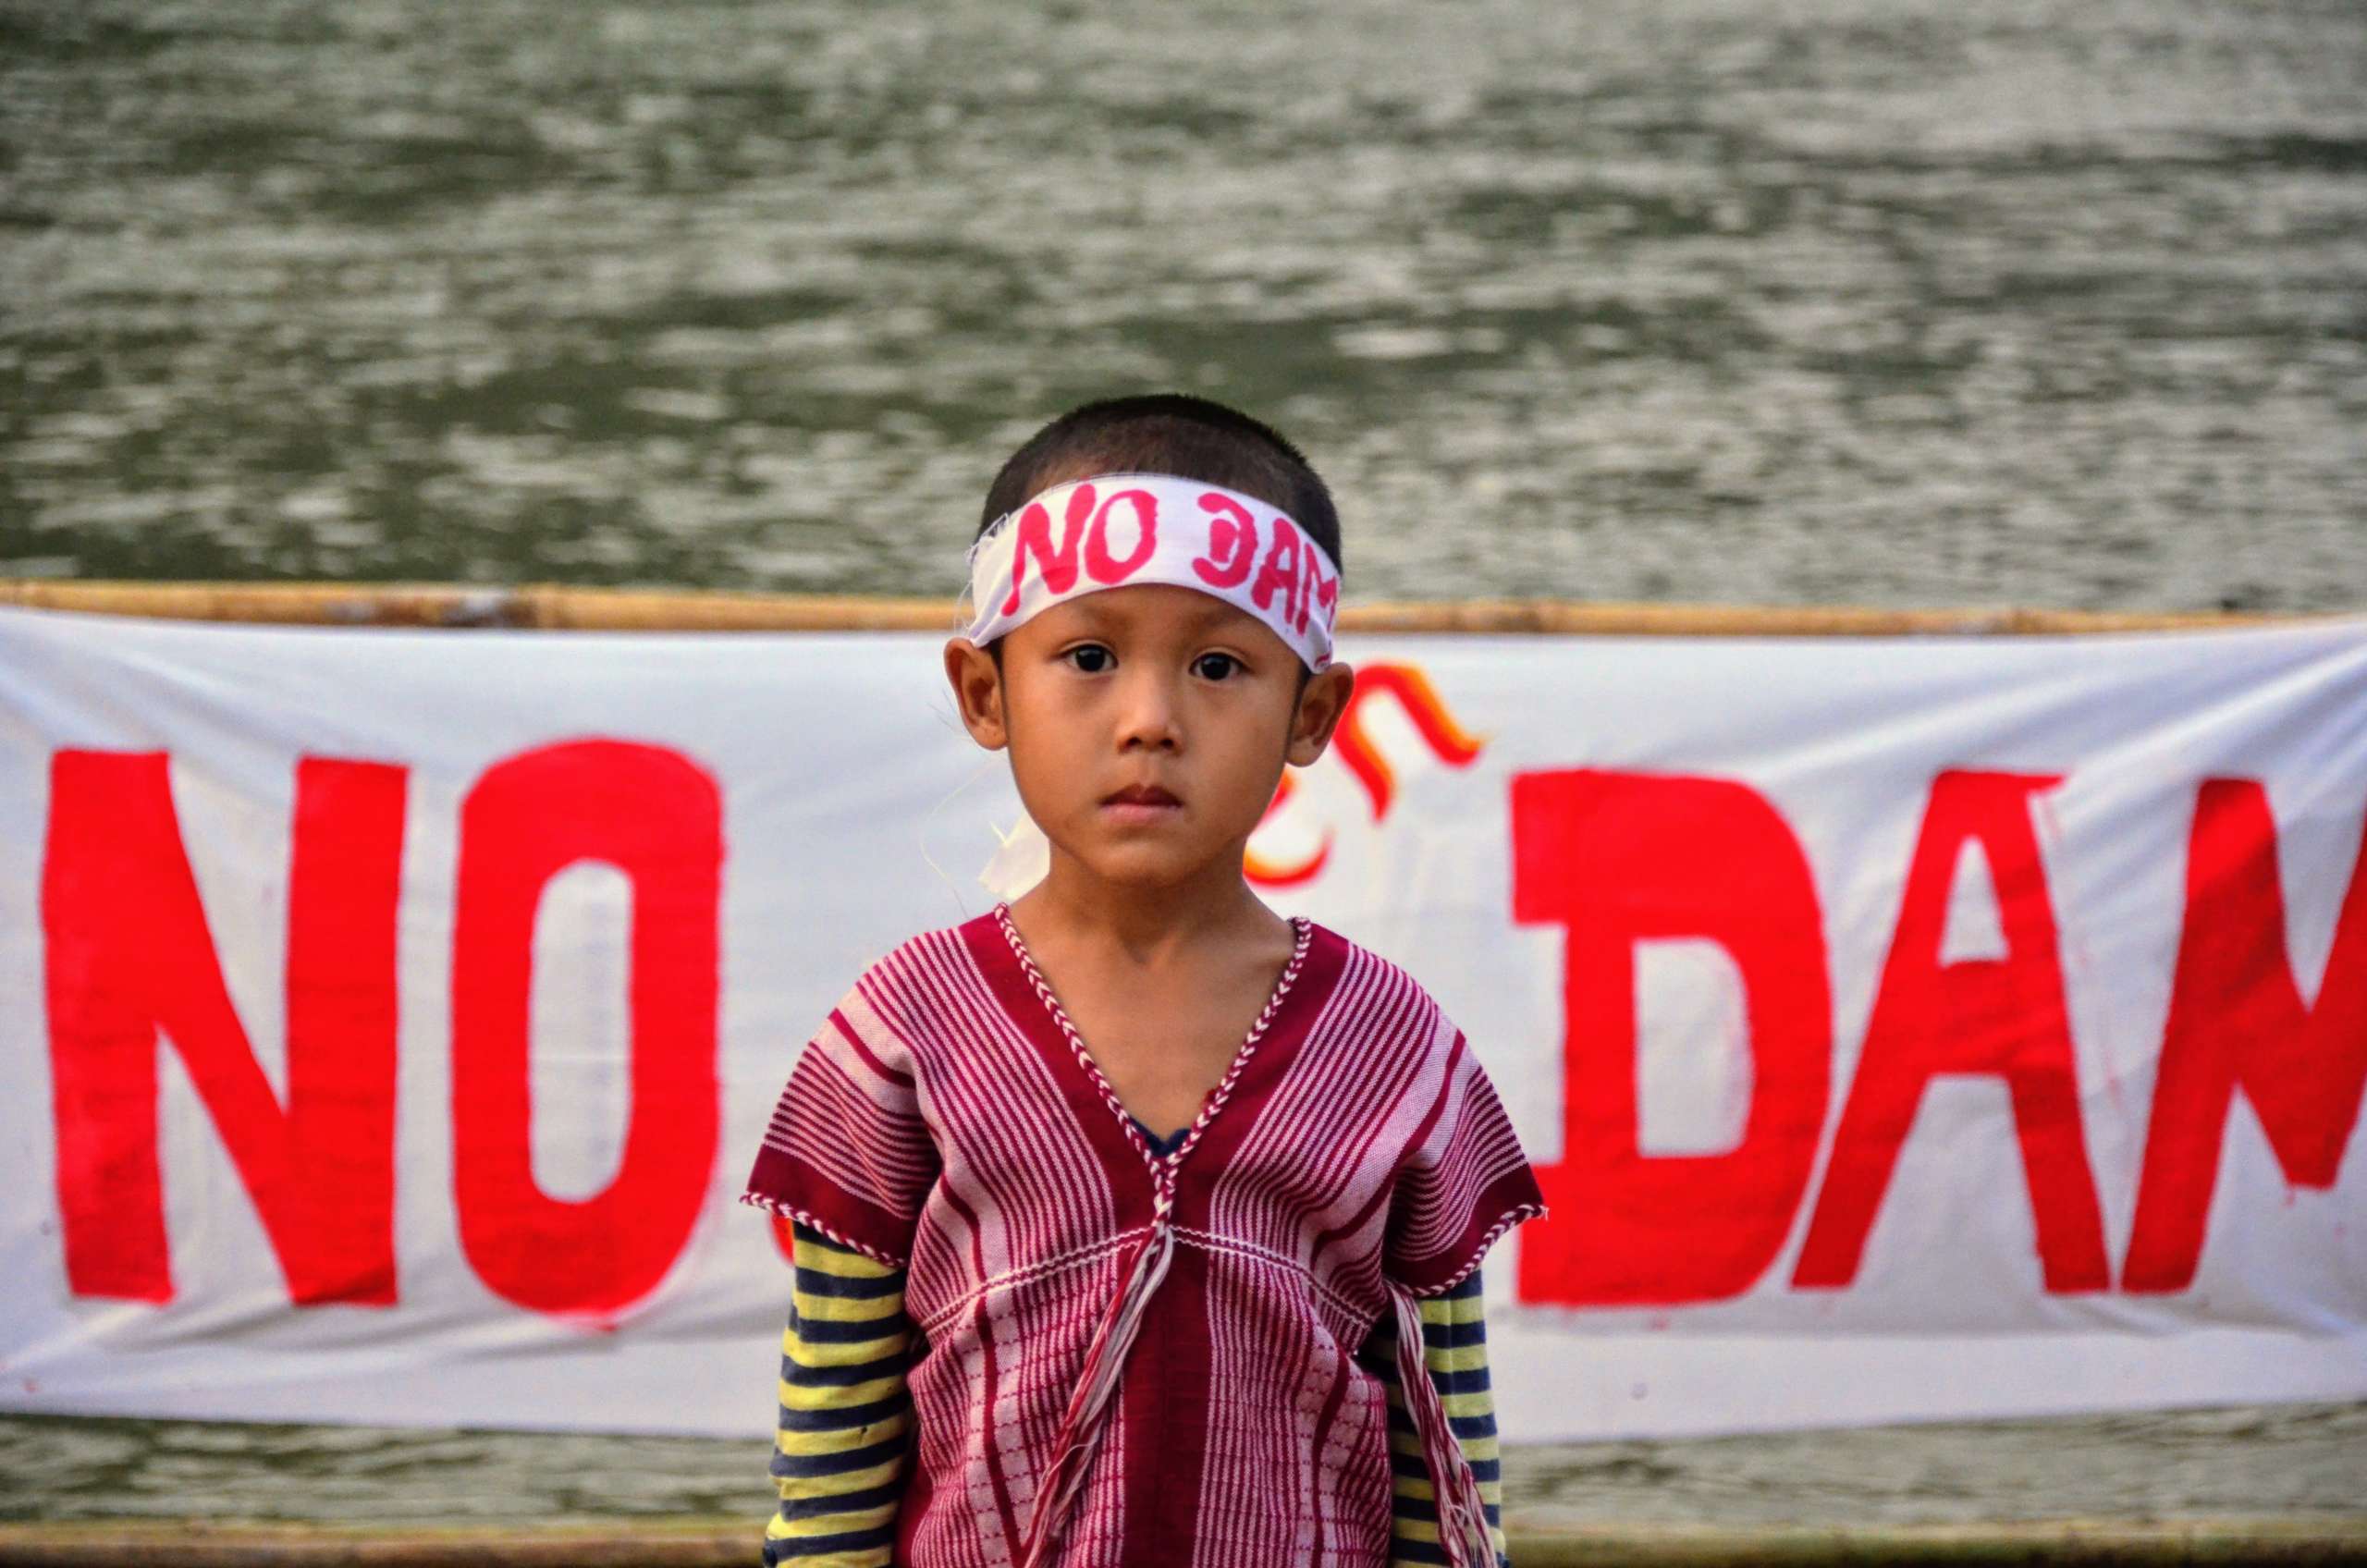 A young activist for a free-flowing Salween River. A team of campaigners and lawyers from EarthRights International joined indigenous Karen communities on the Salween again in 2018 to celebrate the International Day of Actions for Rivers on March 14th. This year, EarthRights International joined the small communities in Eu-Wae-Tta Internally Displaced Person camp for a celebration, in solidarity with communities impacted by any dam projects anywhere on the Salween River.